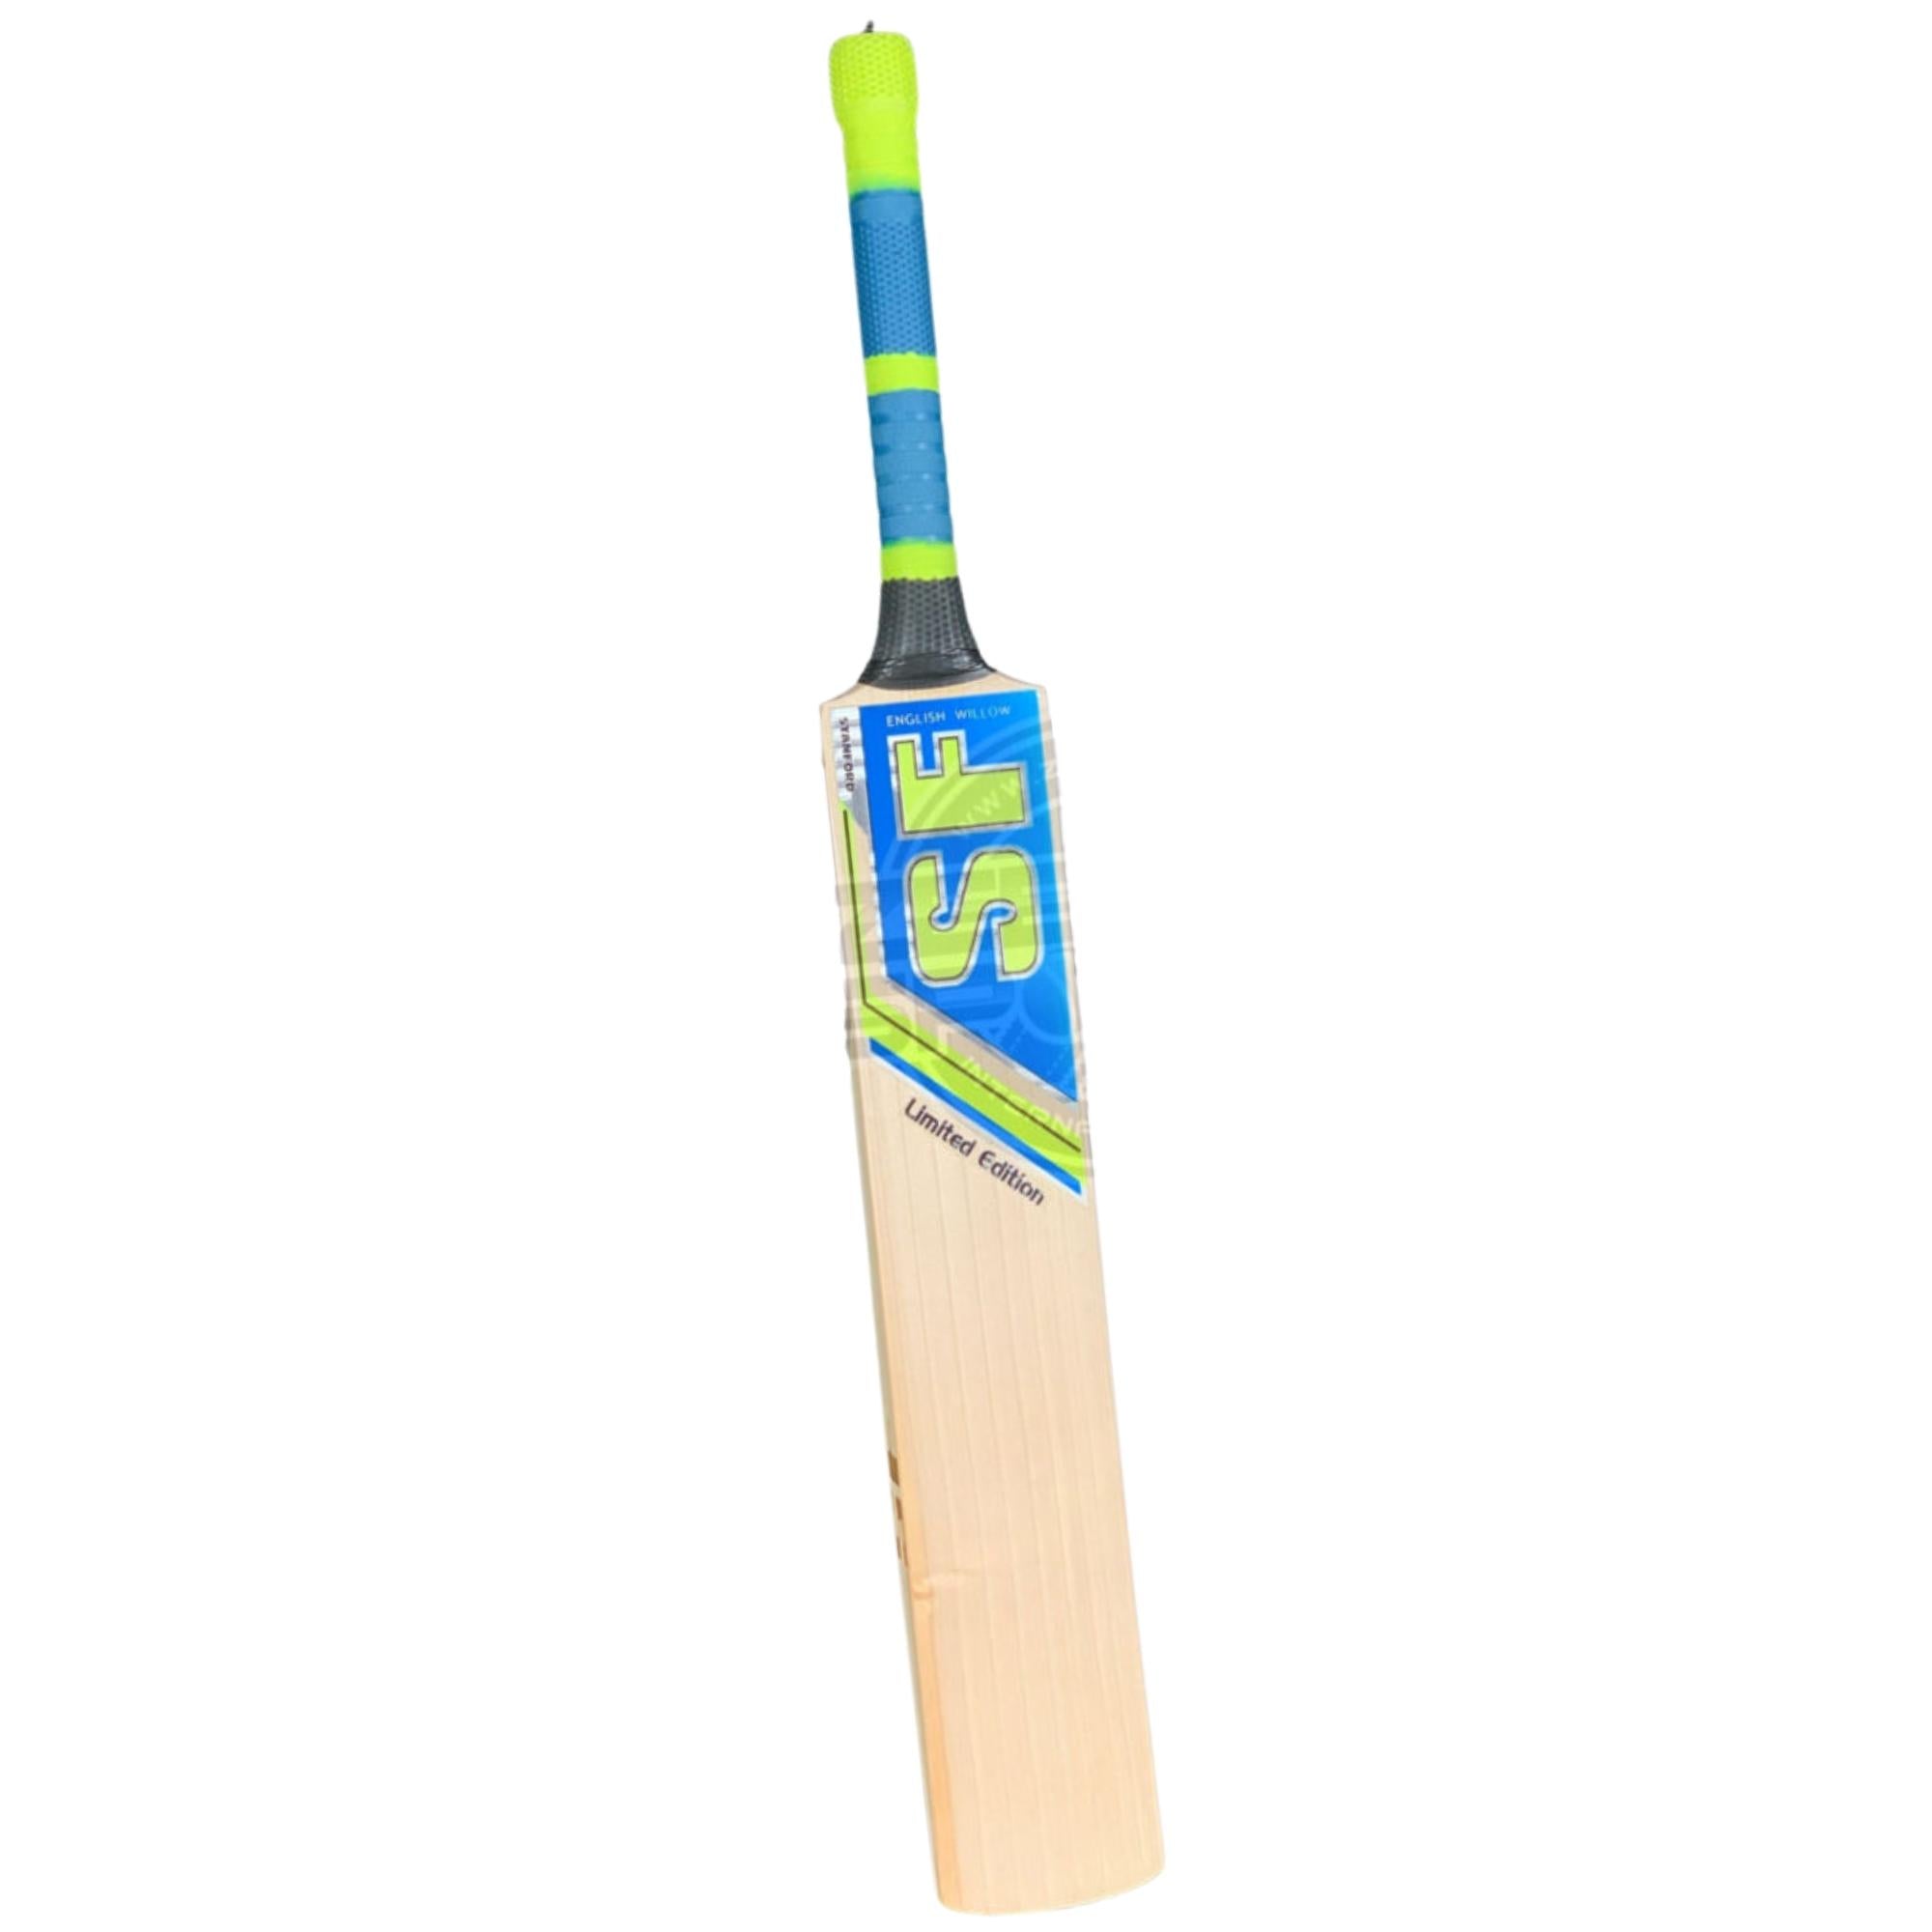 SF Cricket Bat Limited Edition Player's Grade English Willow